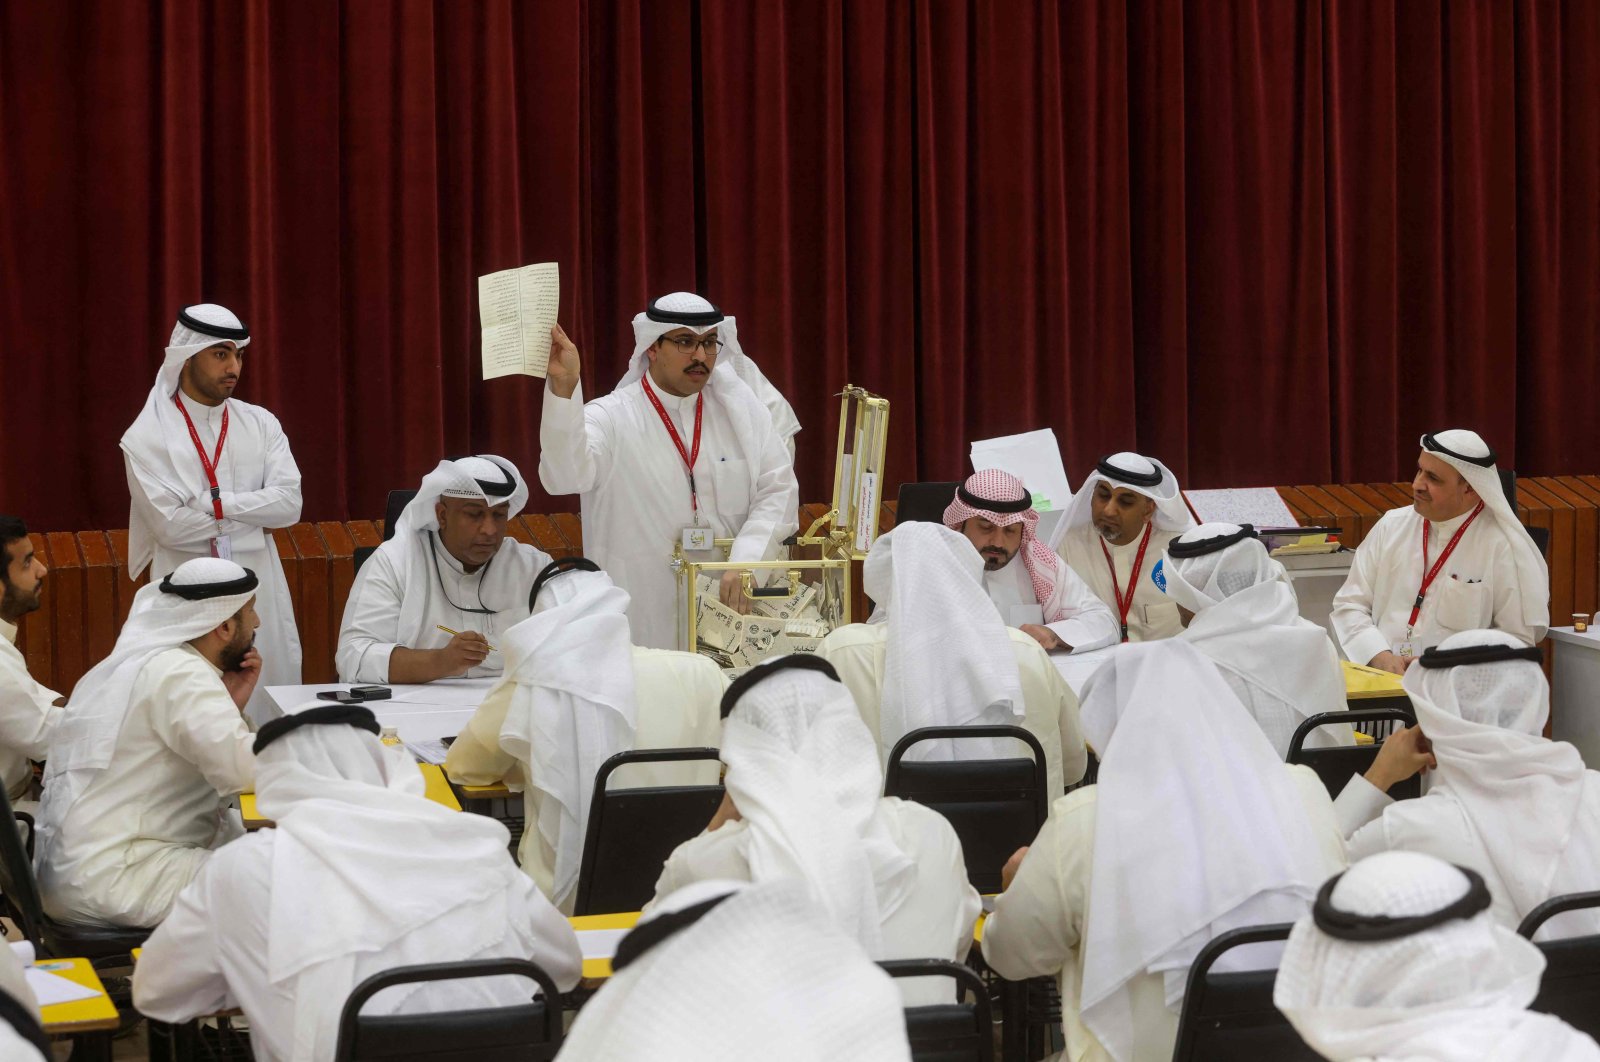 A Kuwaiti judge and his aides count the ballots at a polling station for parliamentary elections, in the Abdullah al-Salem district of Kuwait City, Kuwait, June 6, 2023. (AFP Photo)